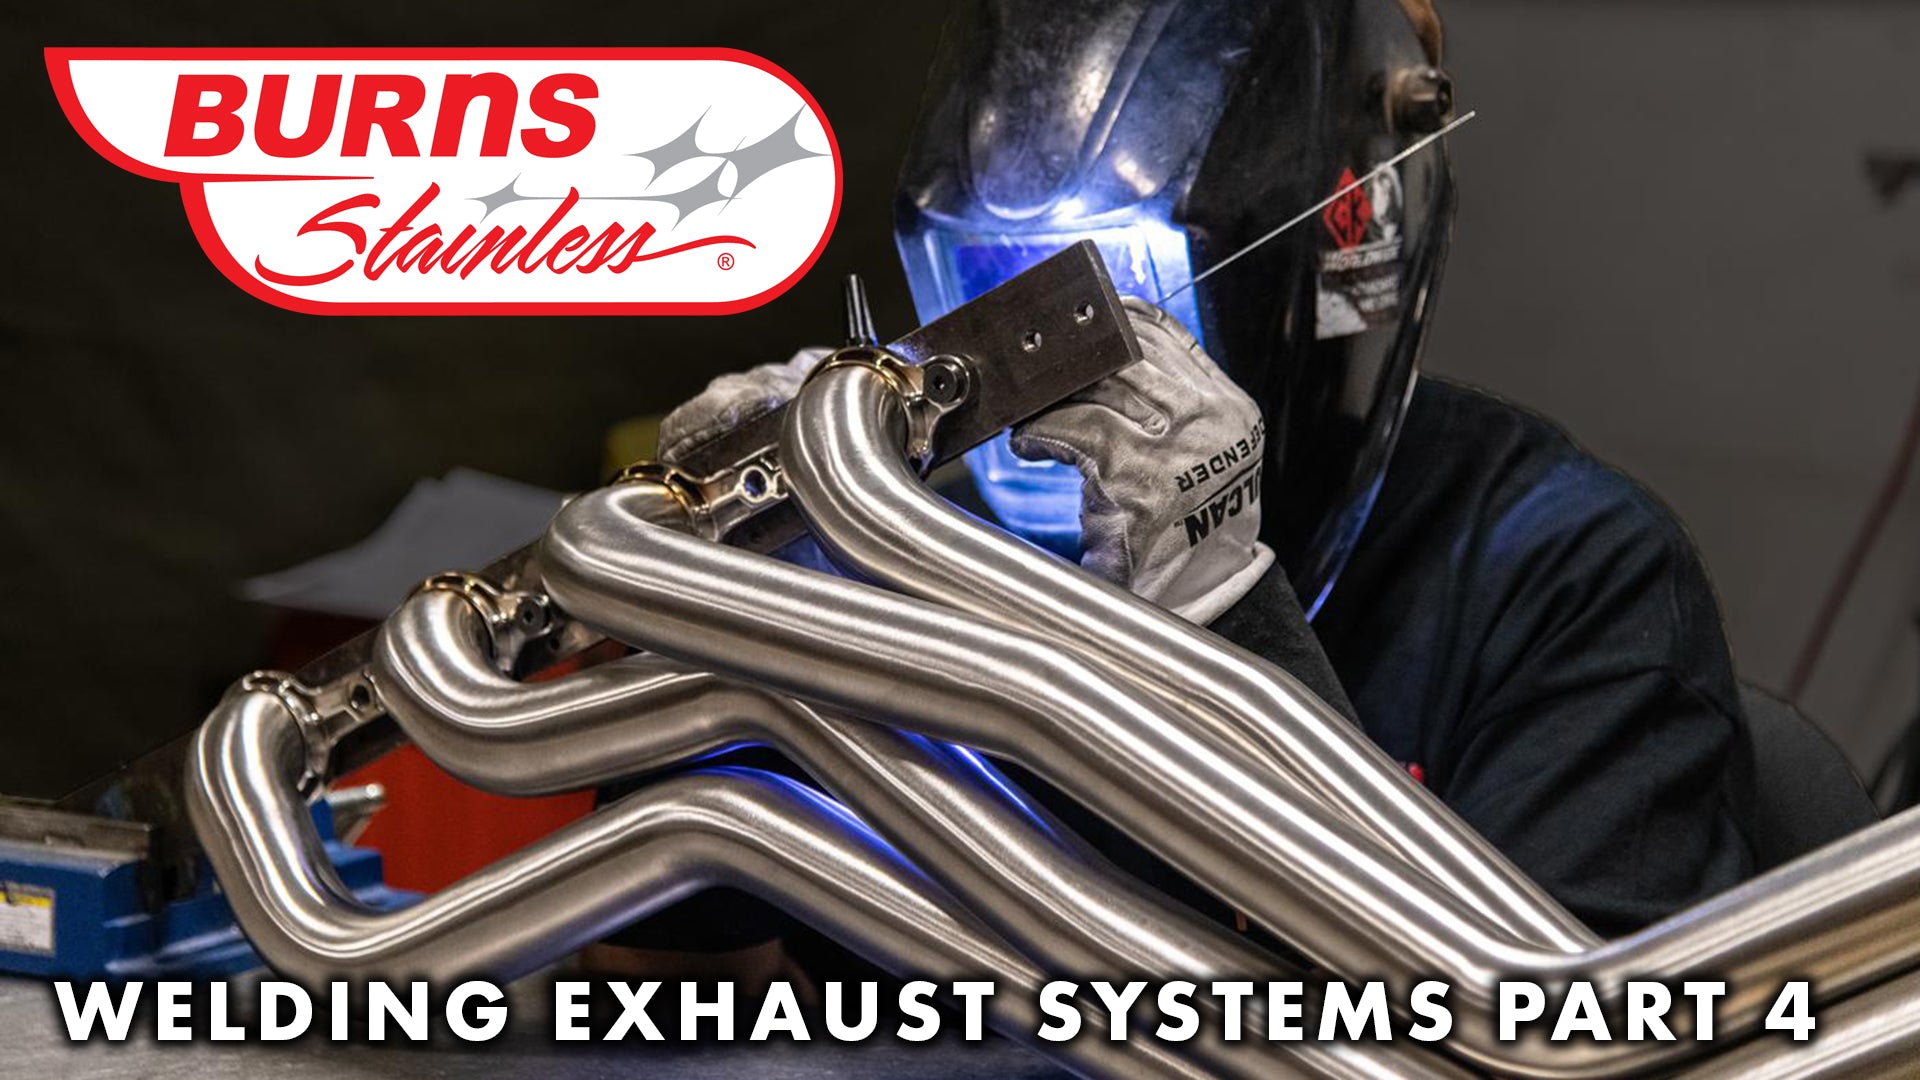 Welding Exhaust Systems - Part 4